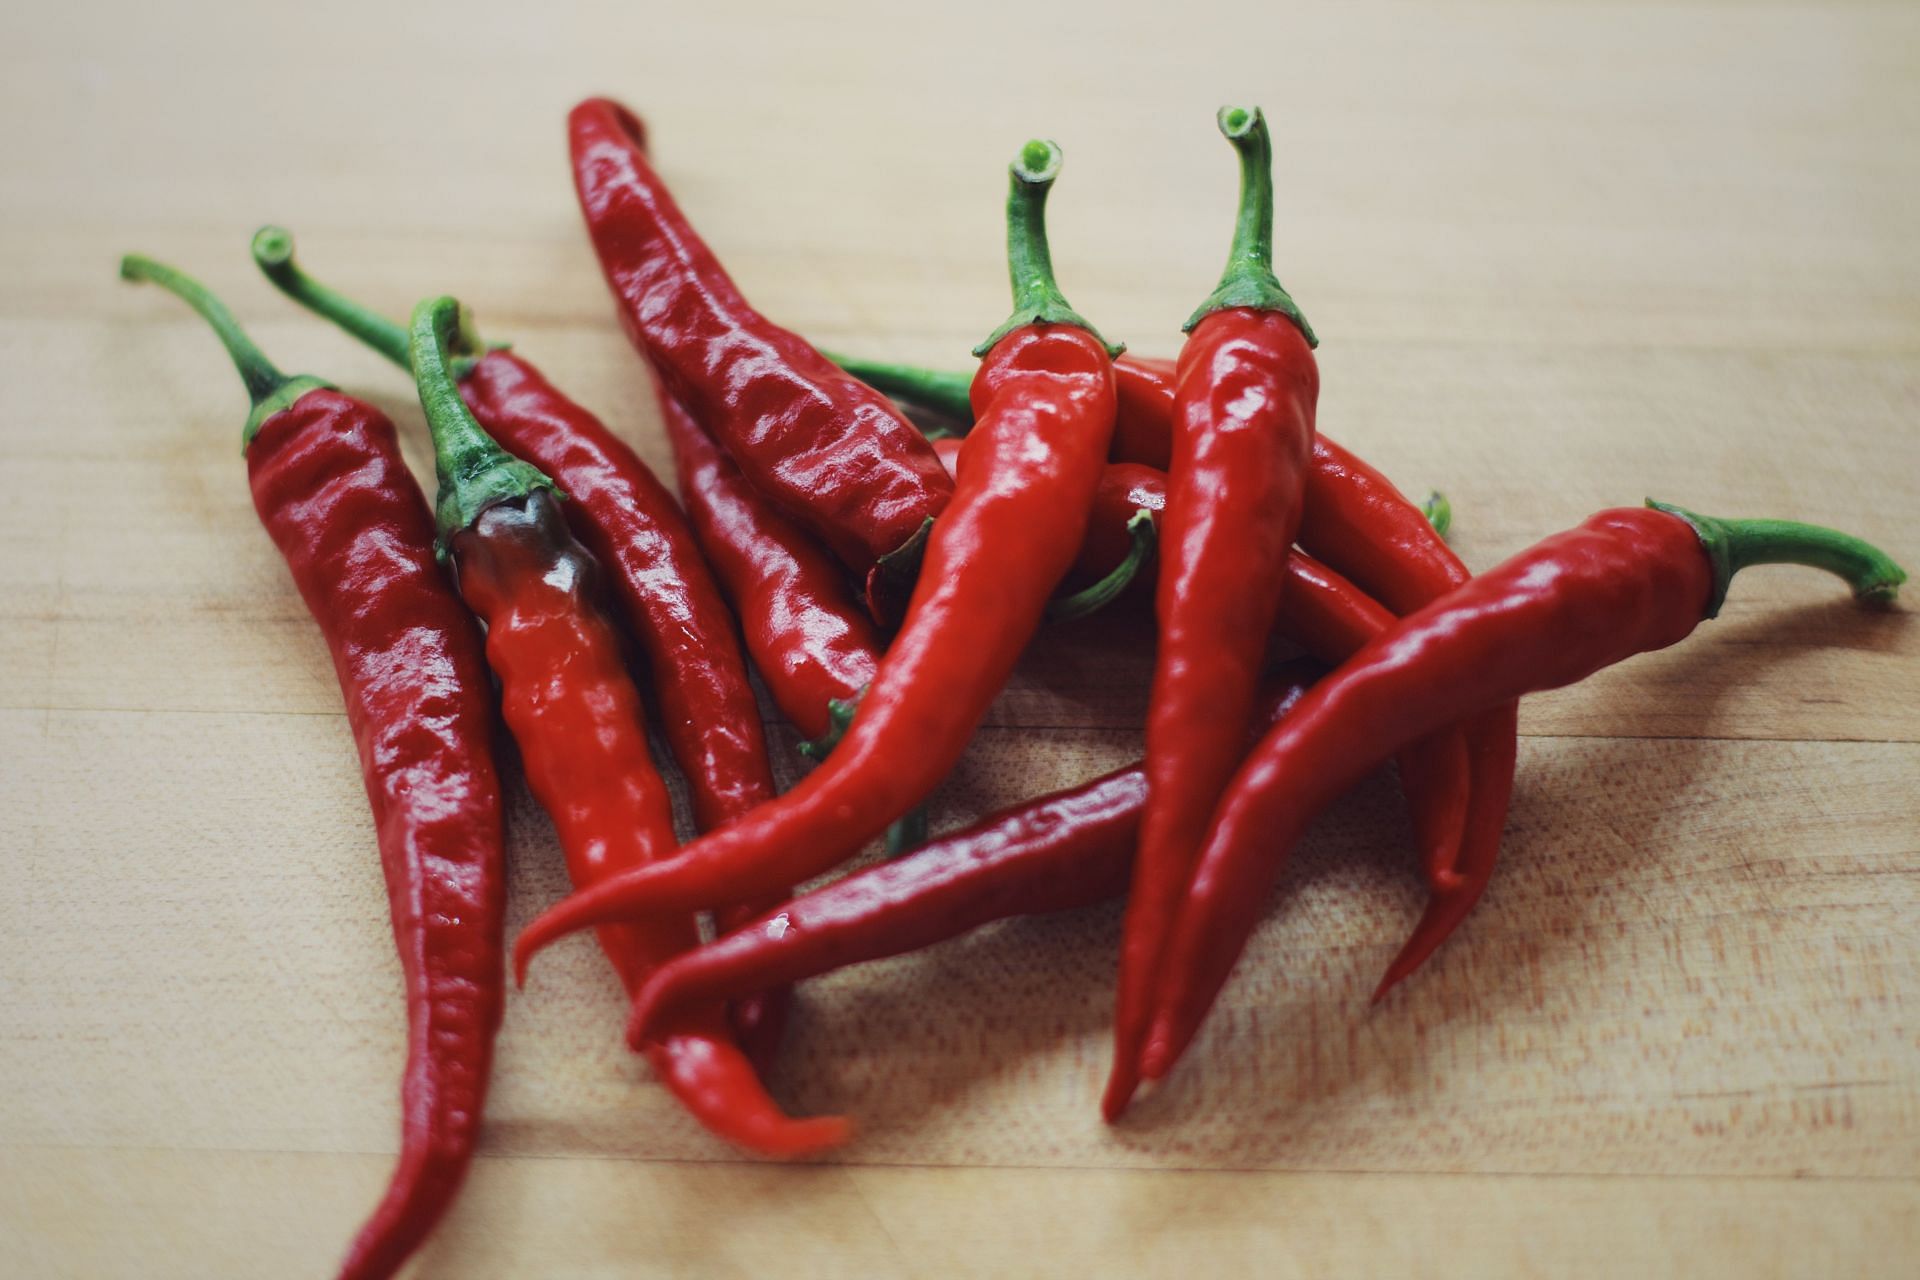 Is cayenne pepper good for you? (Image via Unsplash/ Ryan Quintal)